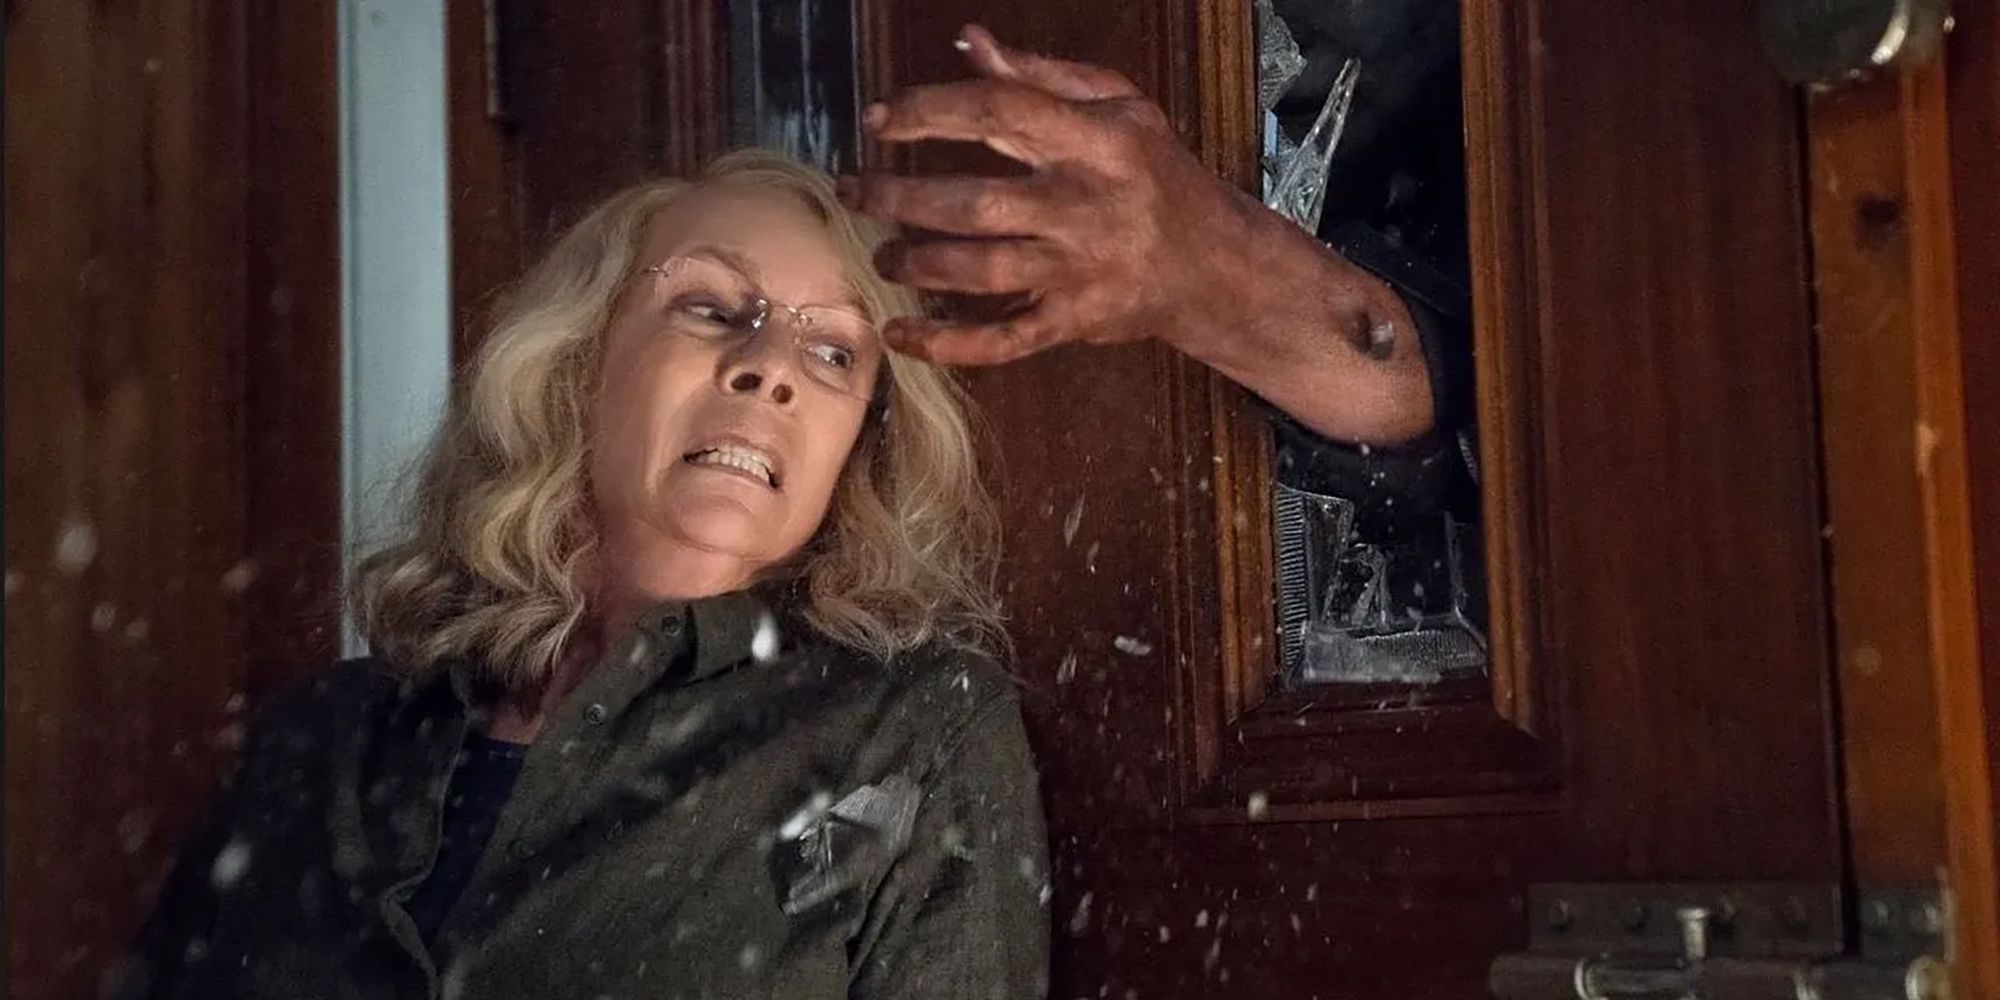 Laurie Strode gets ambushed by Michael Myers breaking in through a door in Halloween (2018).